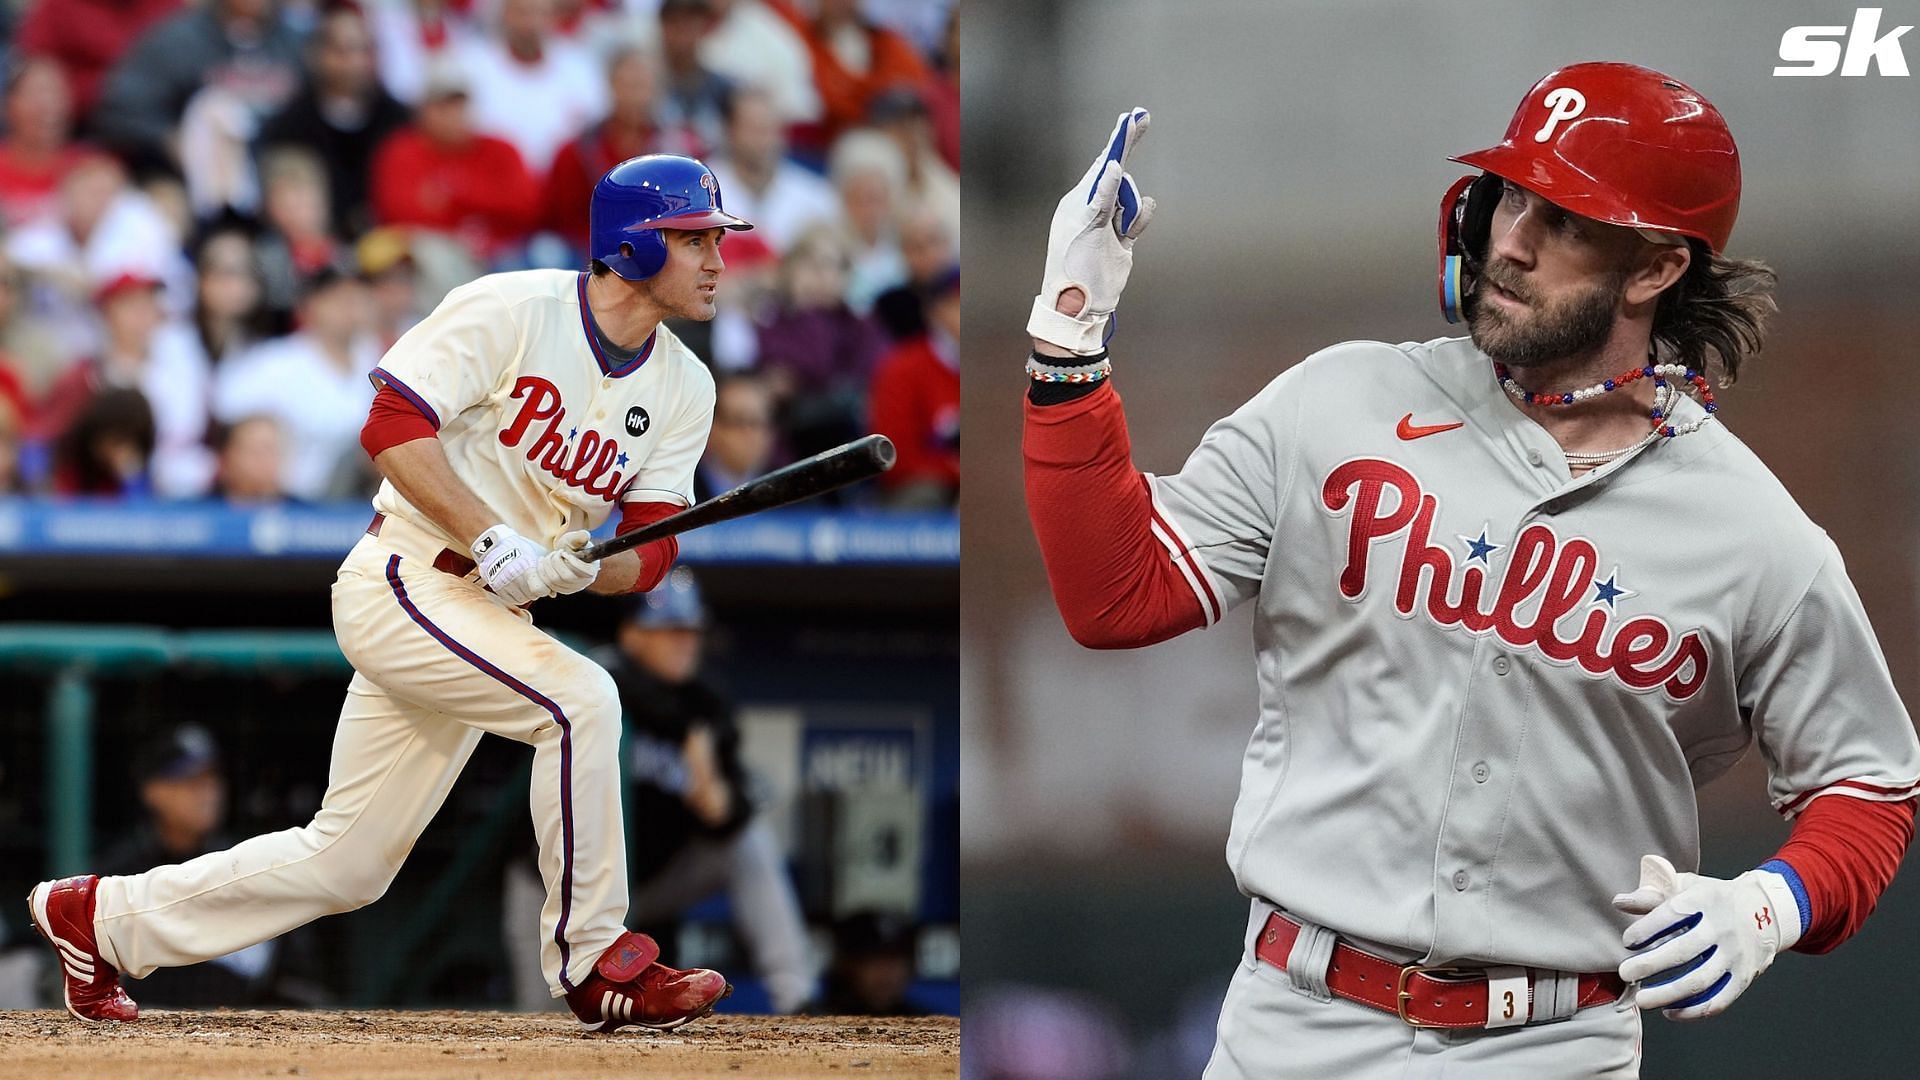 Former Phillies infielder Chase Utley and Bryce Harper 